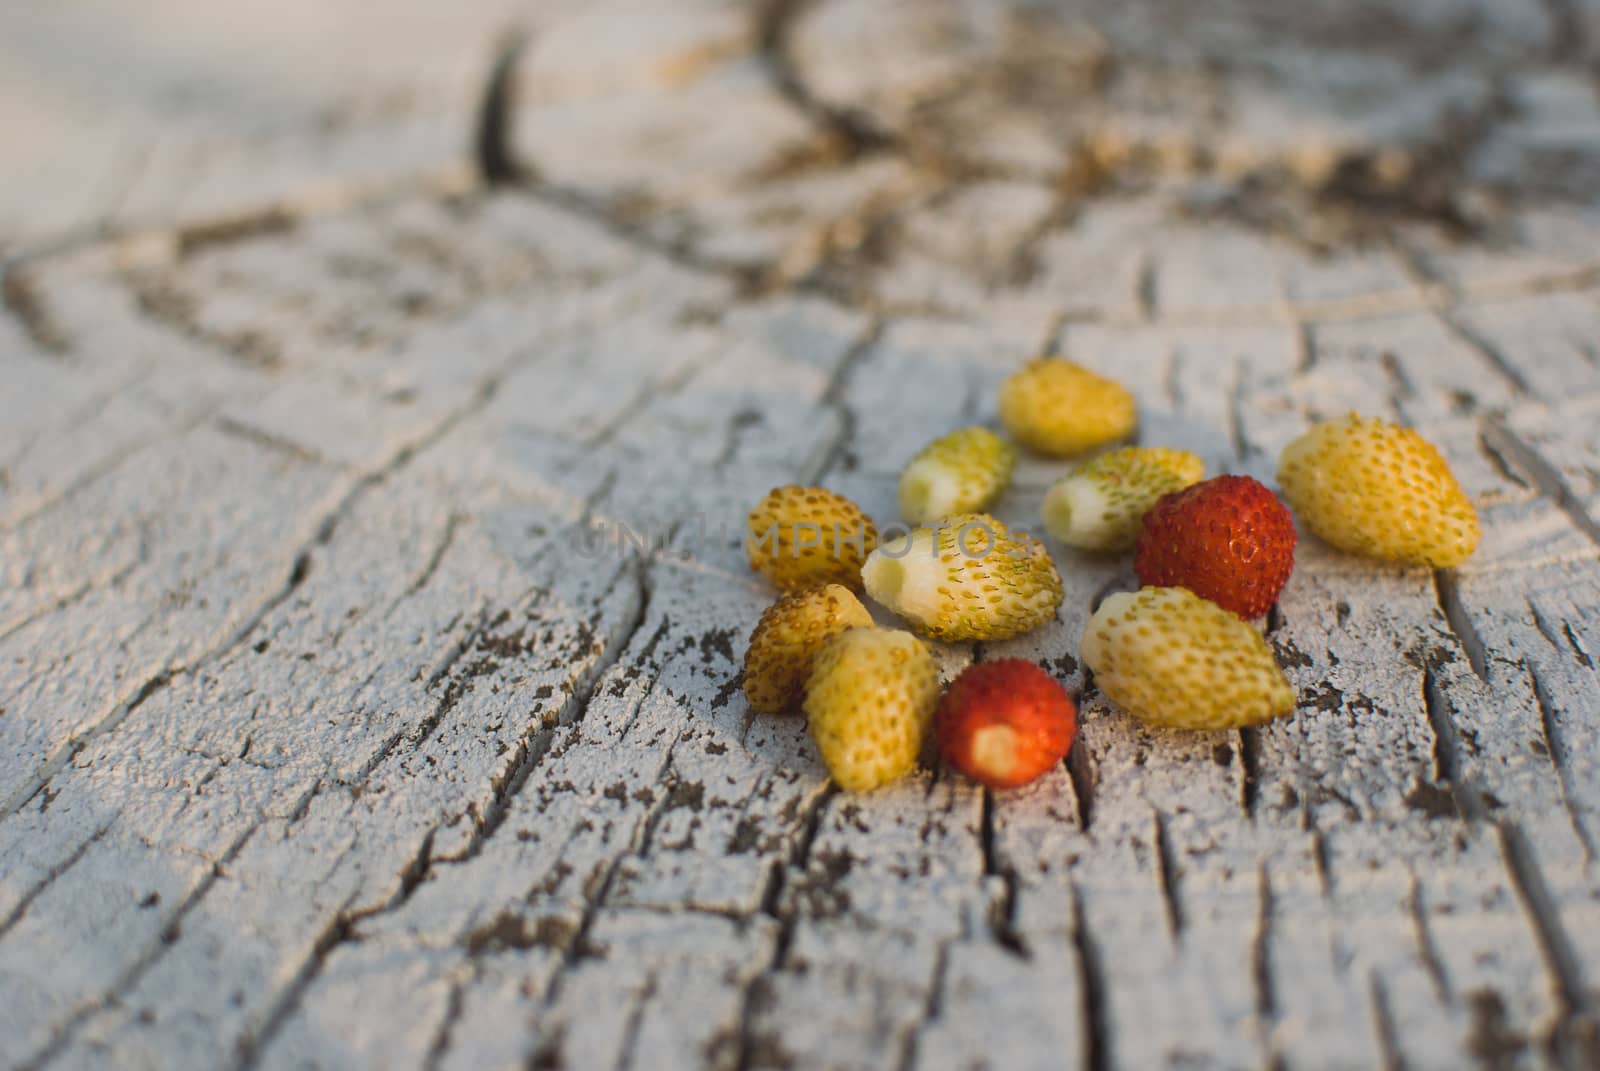 yellow and red Strawberry on the old tree stump with cracks.